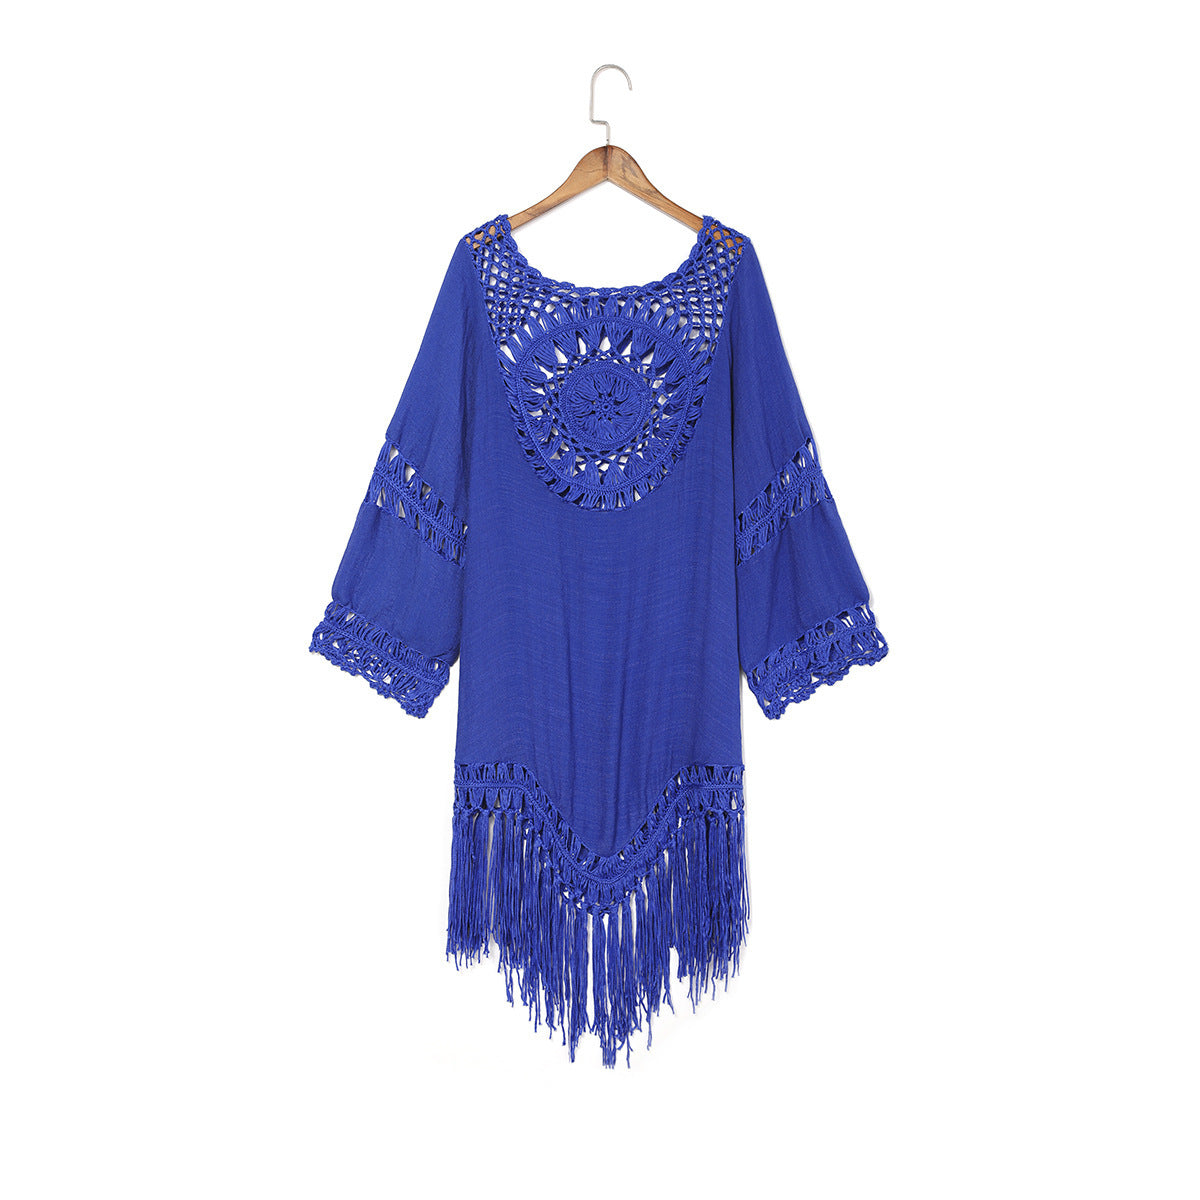 Loose beach blouse with stitching fringe